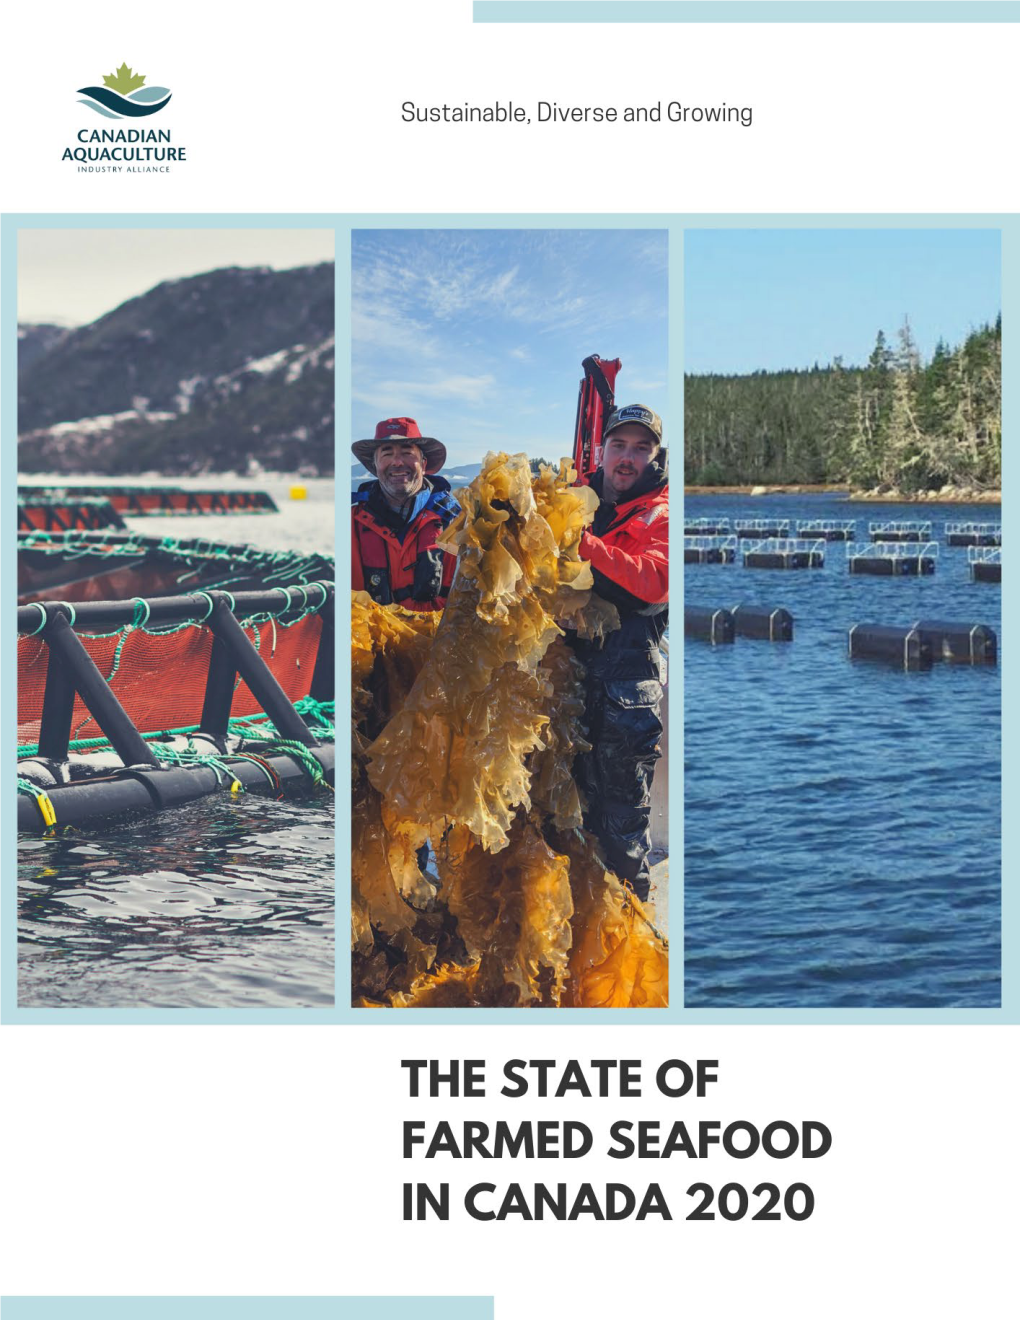 Diversity of Farmed Seafood Across Canada